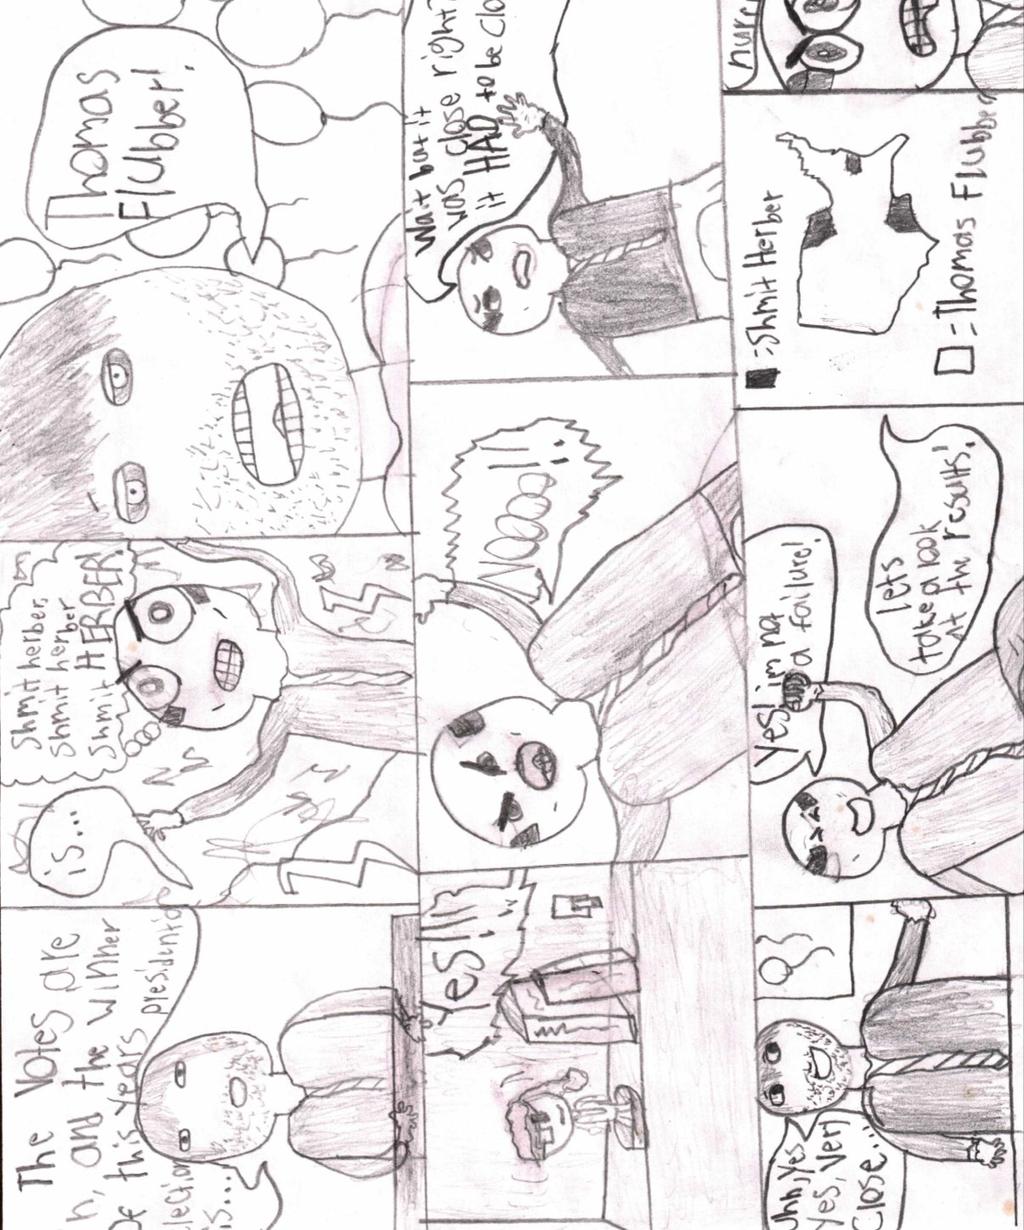 The Comics Page Shawn the Alien By Ned